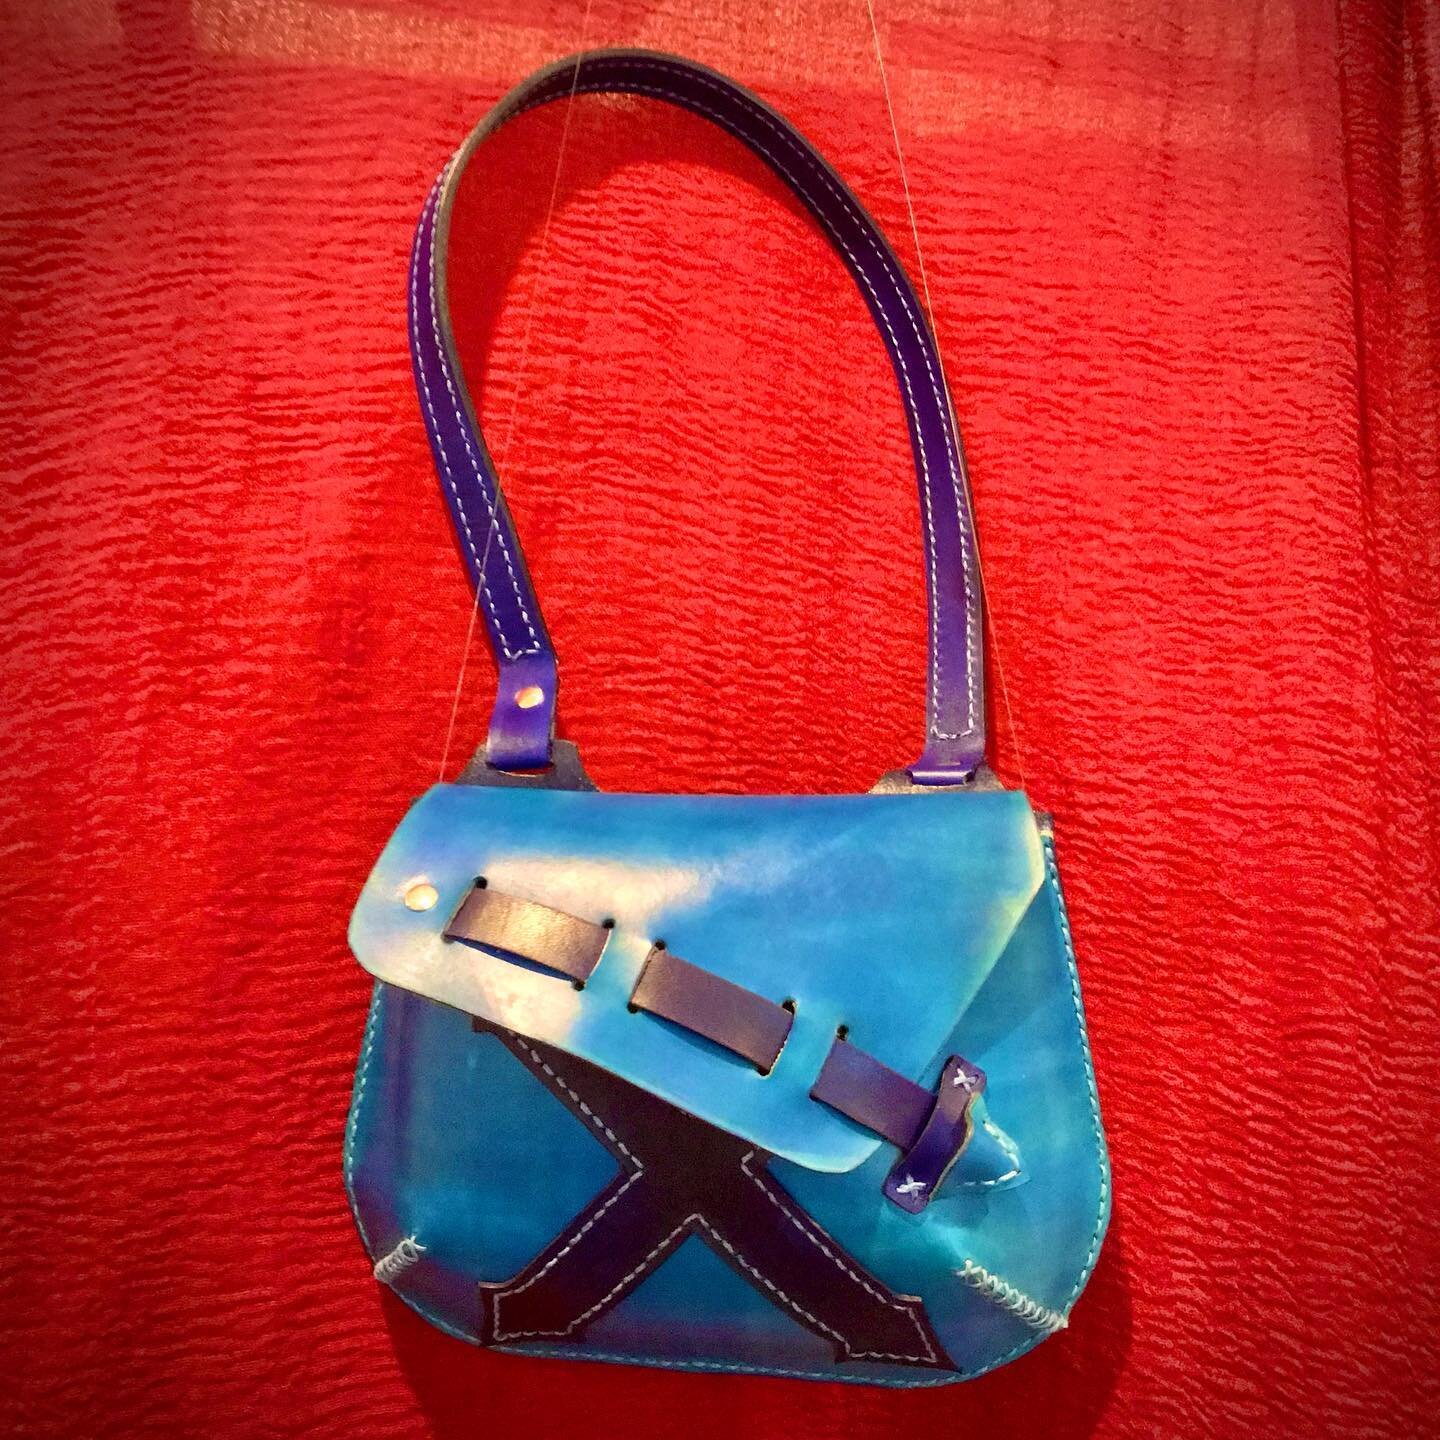 All I See Is Blue. Latest project off the table, The Diana Bag. 
&bull;
Link to the store in Bio. #ALC #Leather #LeatherCraft #COVIDSkill #HandCut #HandStitched #HandDyed #HandMade #KeyWest #LocalArtist #VegTan #ShareMyTandy #NoWastedLeather [design 